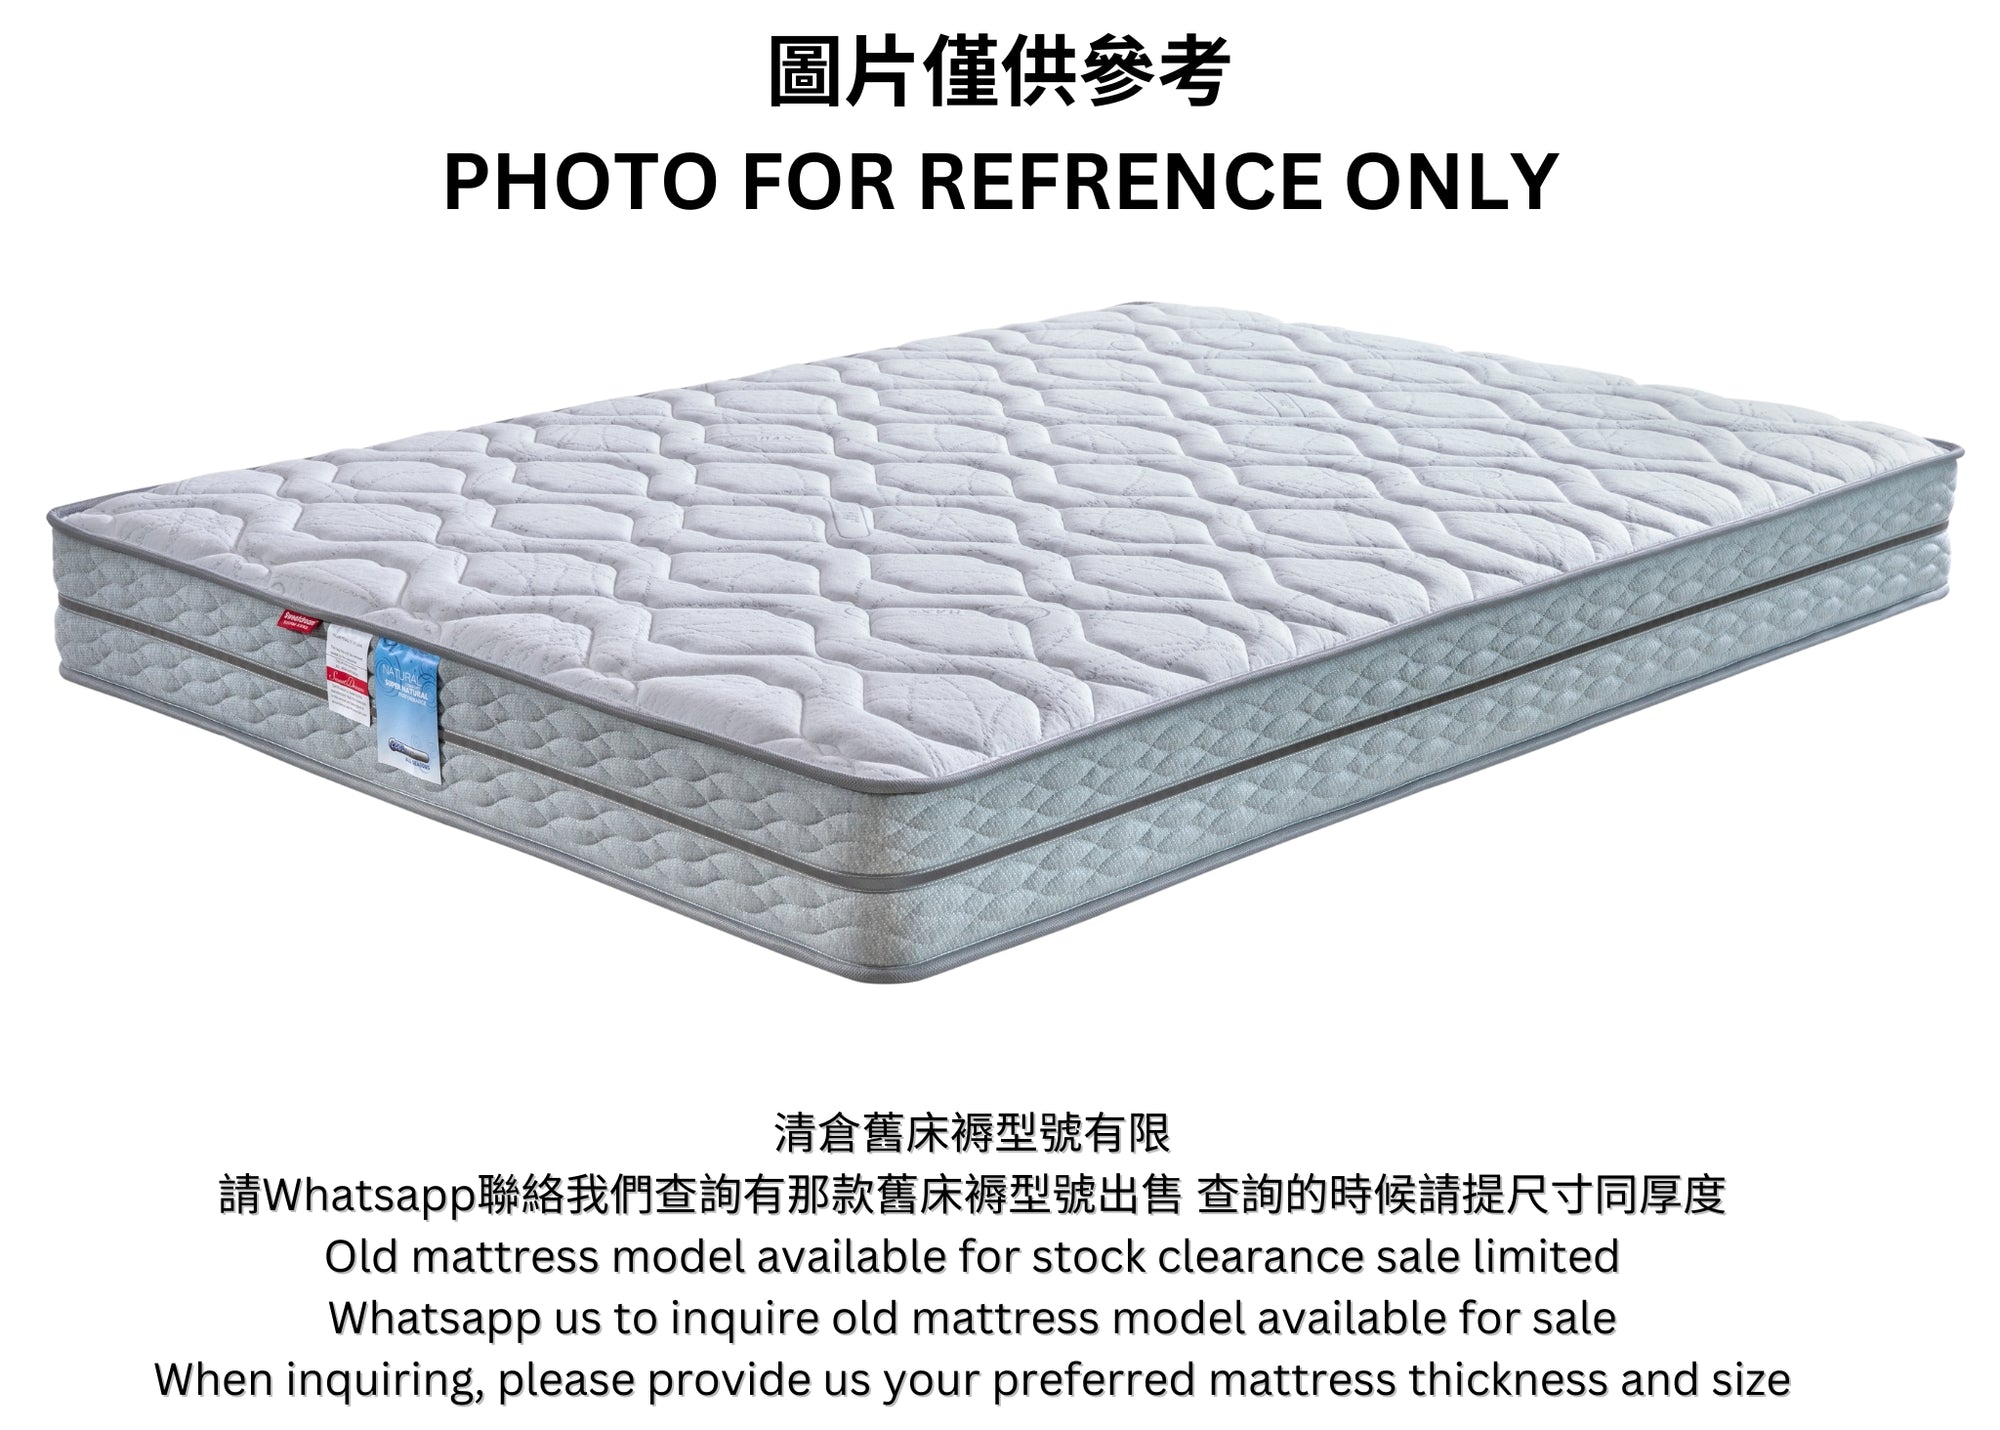 Spinal-Care Mattresses (Inventory Clearance Older Models)